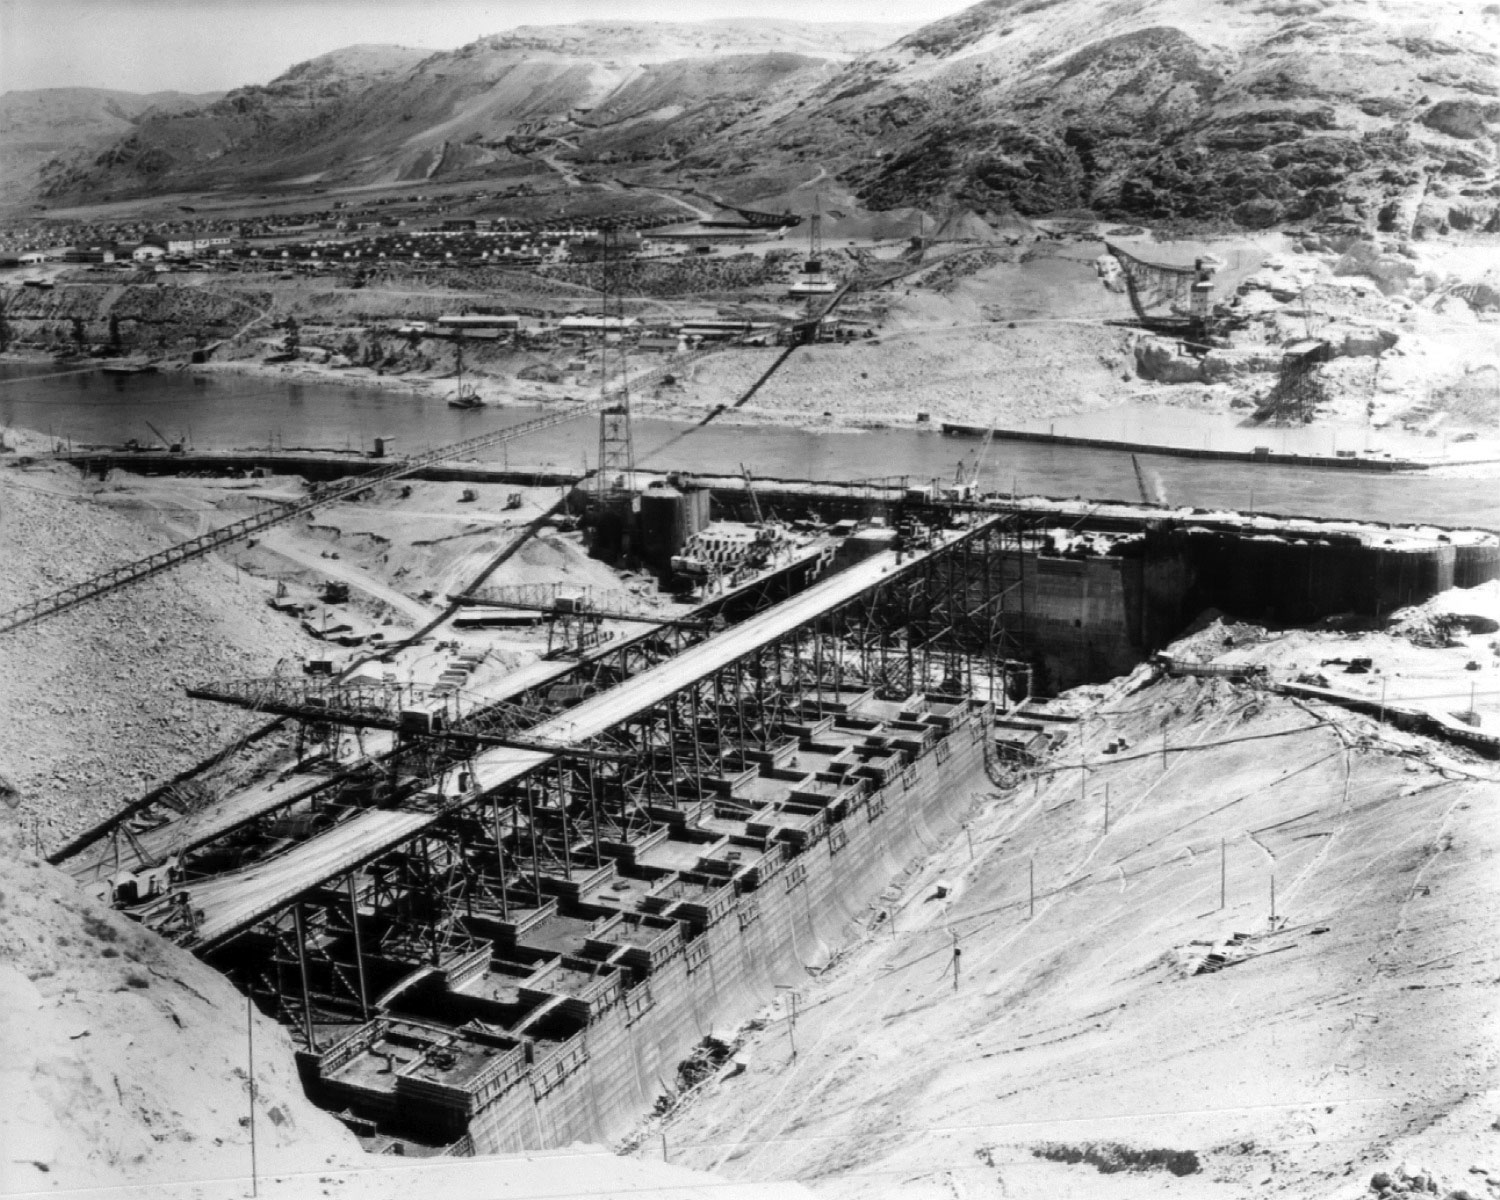 July 24, 1936. West side high and low crane trestles with cantilever cranes at Grand Coulee Dam.